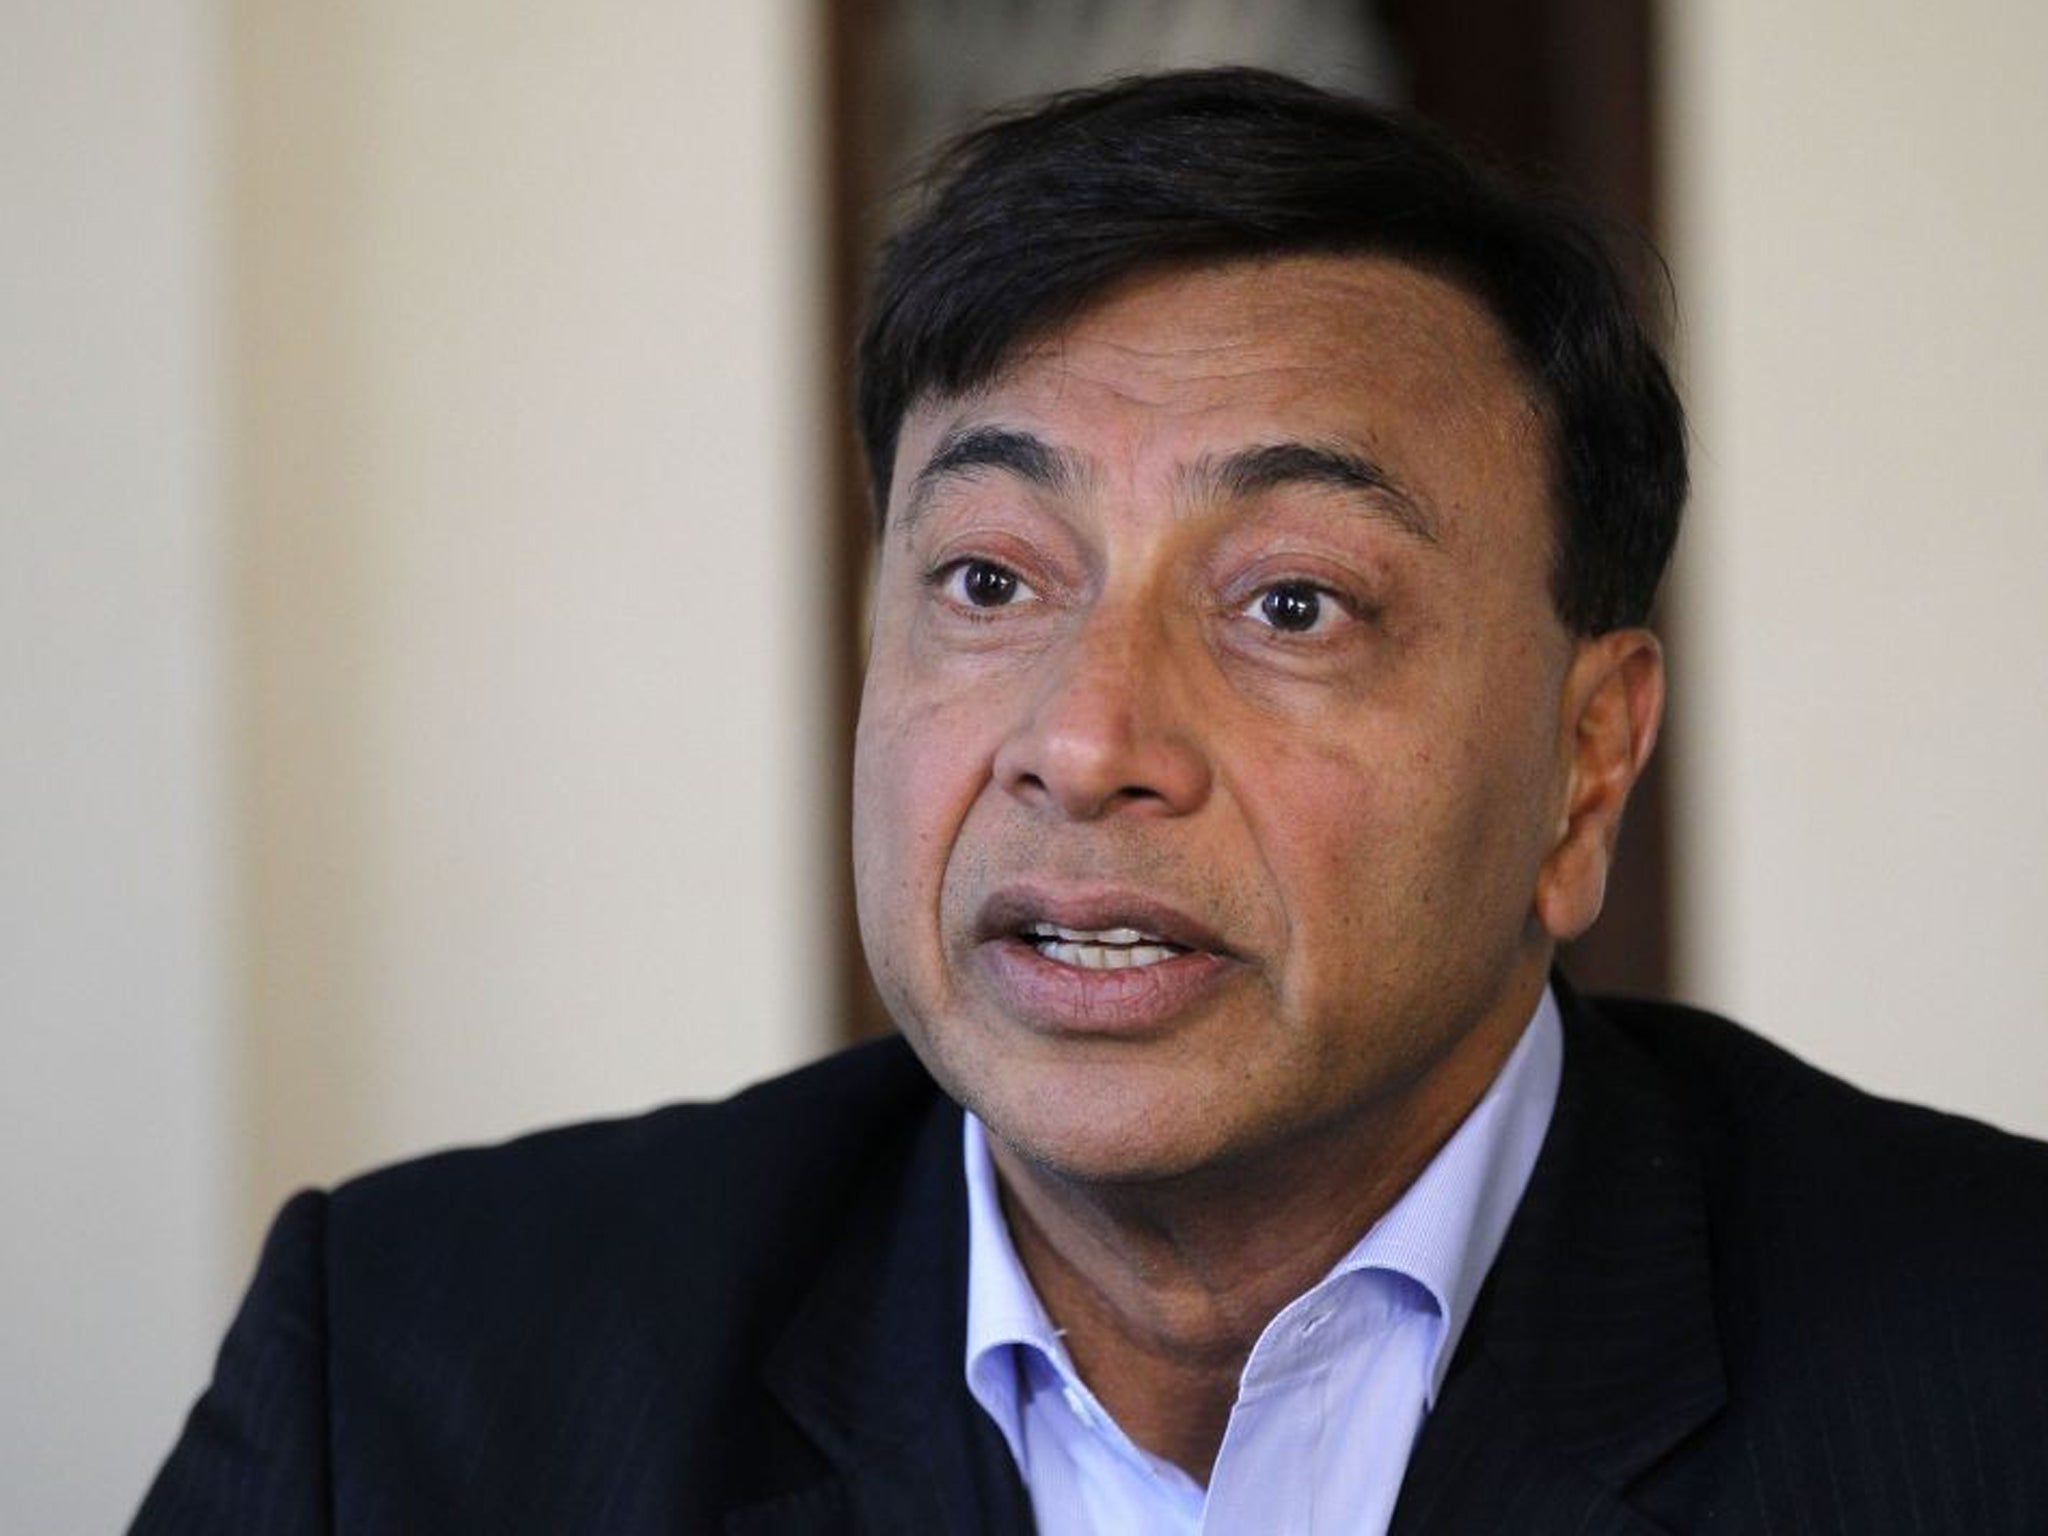 Lakshmi Mittal had until midnight to sell a steel plant at Florange in Lorraine, at which point Paris had threatened to nationalise it